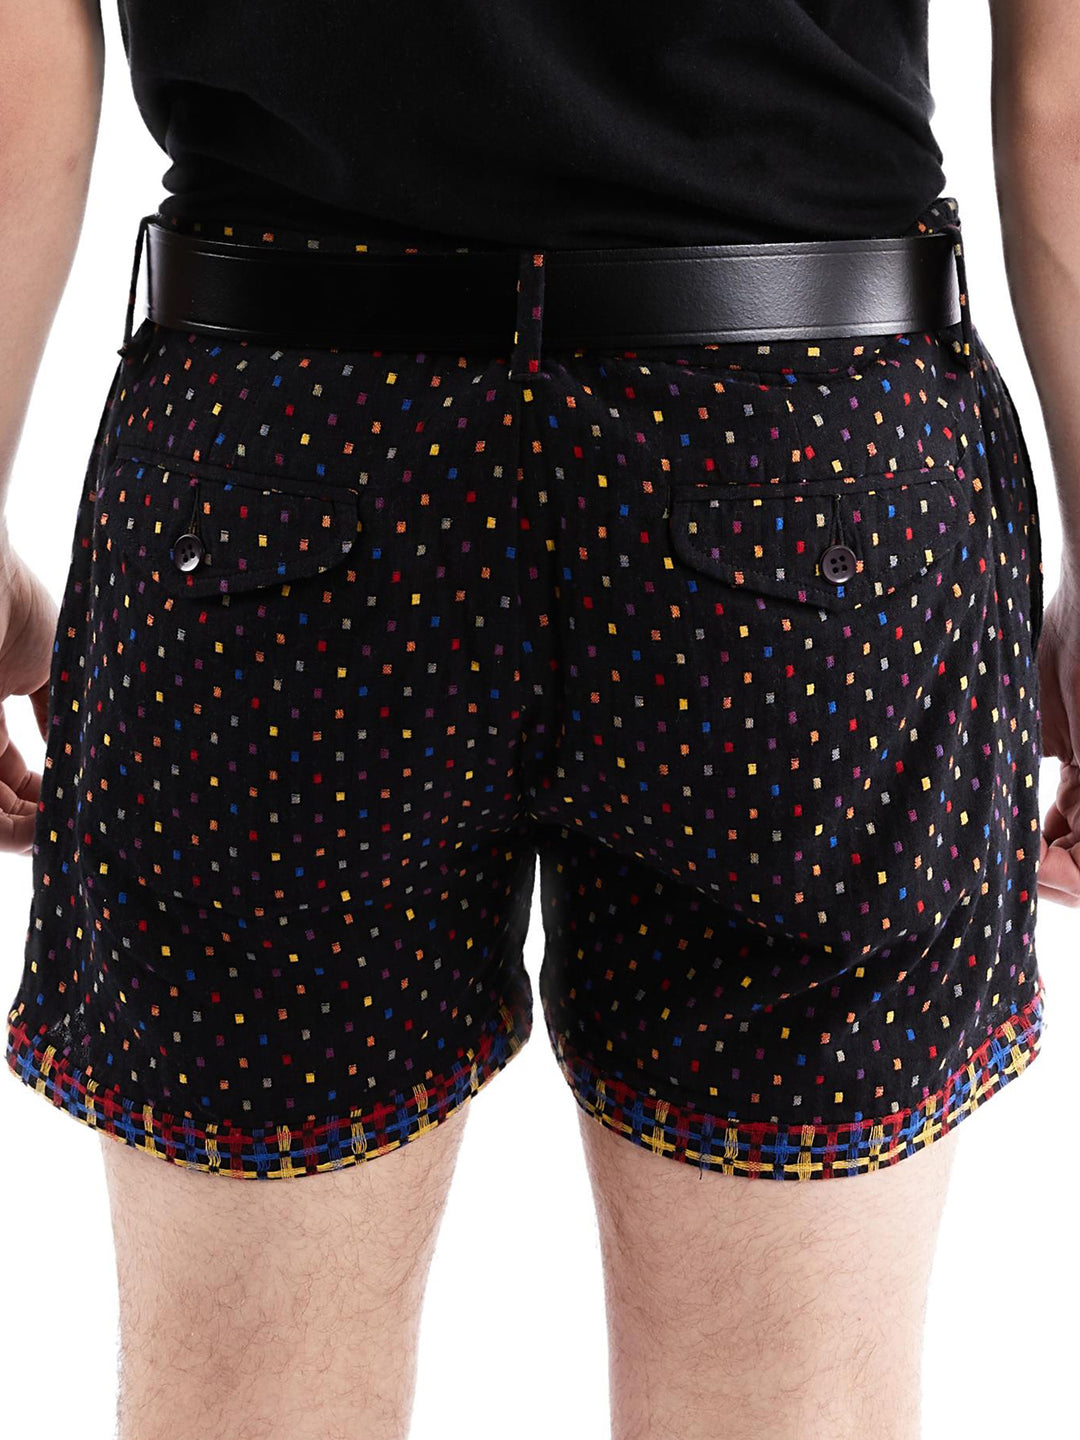 Double Cloth Shorts in Polka Dot (60% OFF)